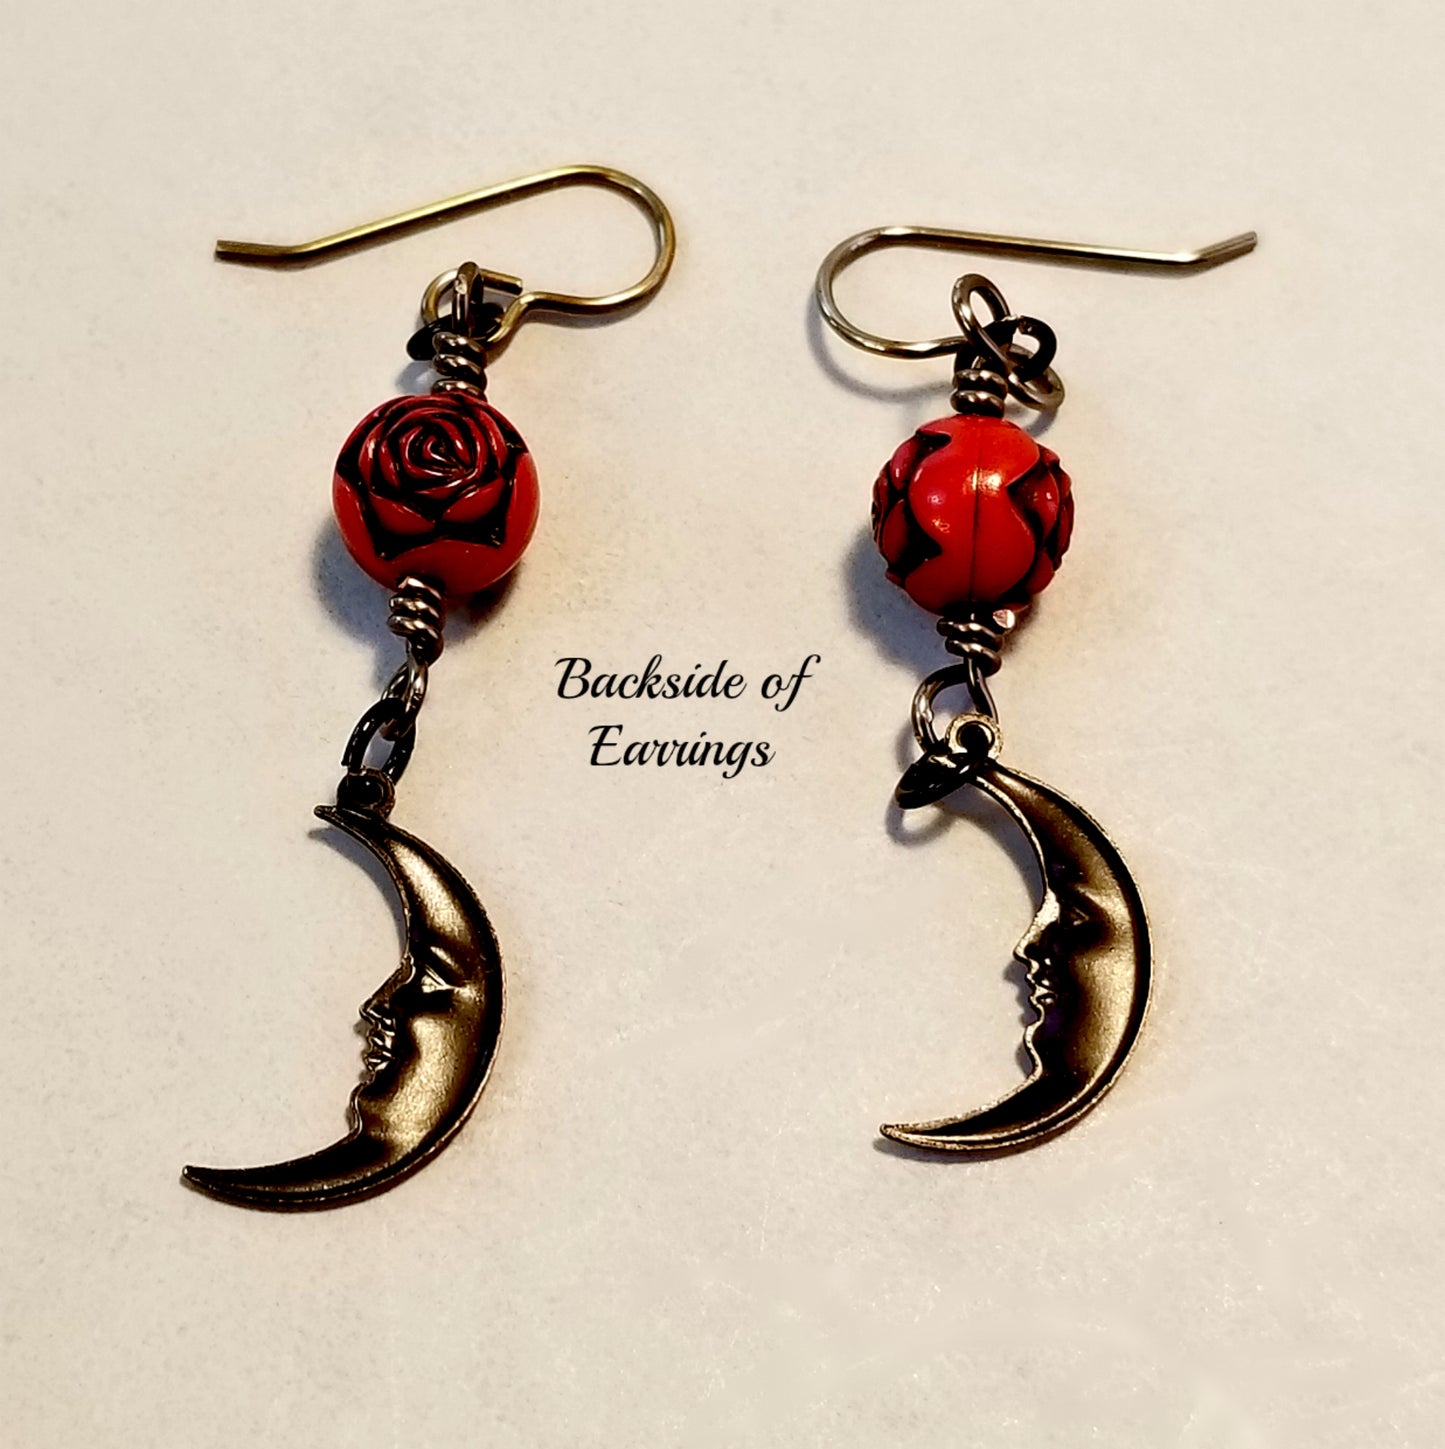 Moon Face Earrings, Crescent Moon Jewelry, Gift Idea for Her